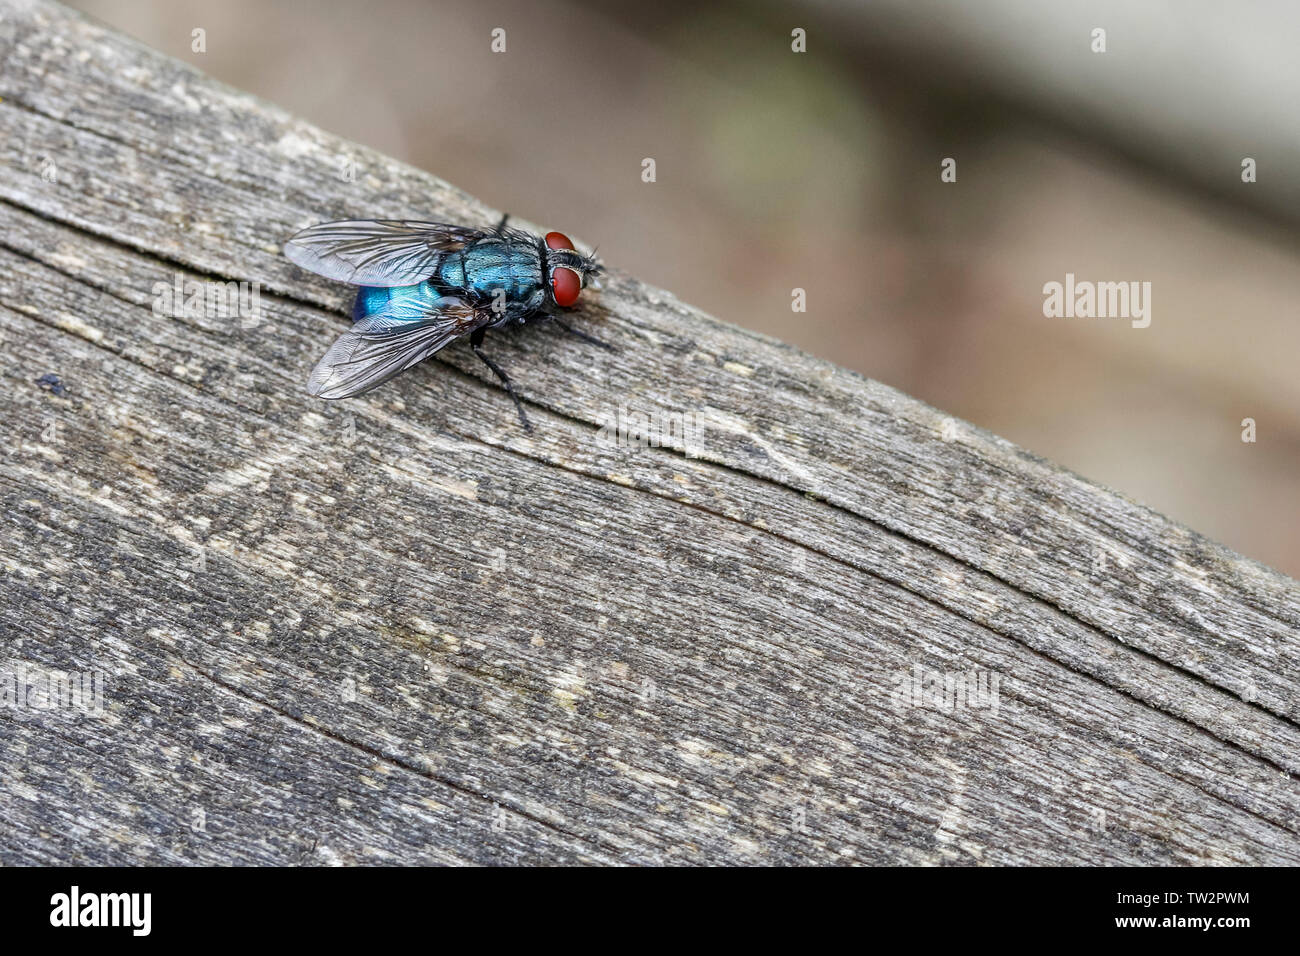 Bluebottle fly settled on wooden fencing blue shiny body large reddish eyes and jowls. Loud buzzing sound when in flight common in summertime. Stock Photo